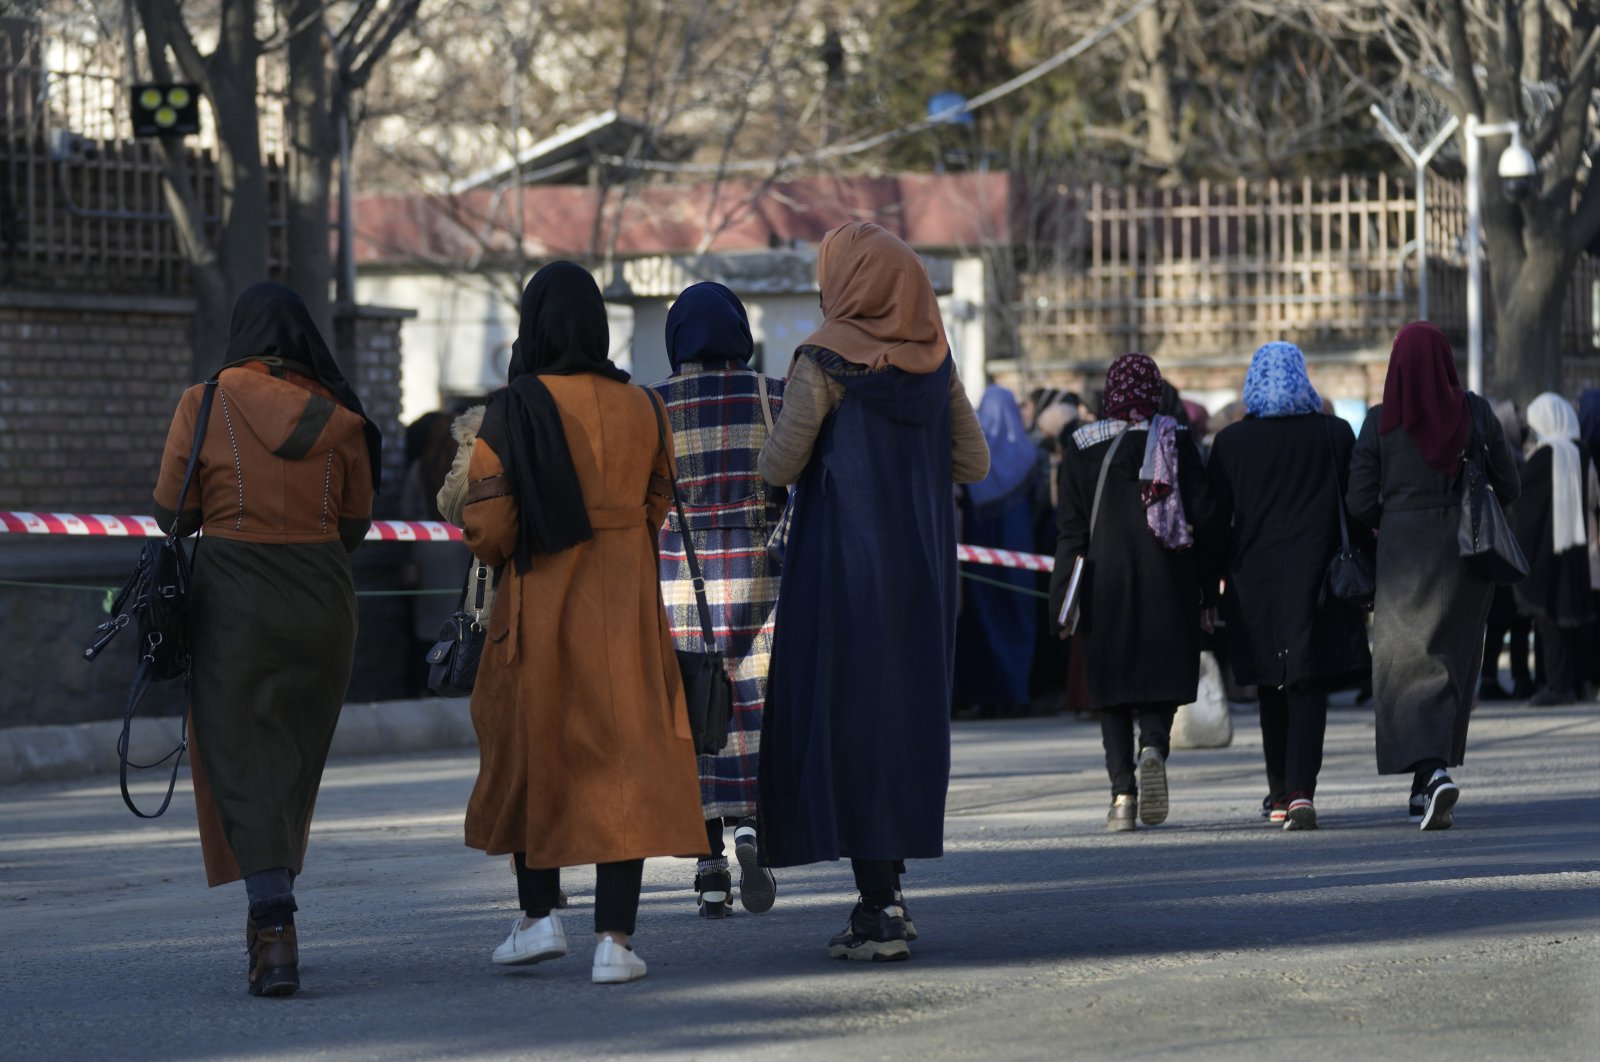 Afghan students walk on a street before they enter their university in Kabul, Afghanistan, Feb. 26, 2022. (AP Photo)